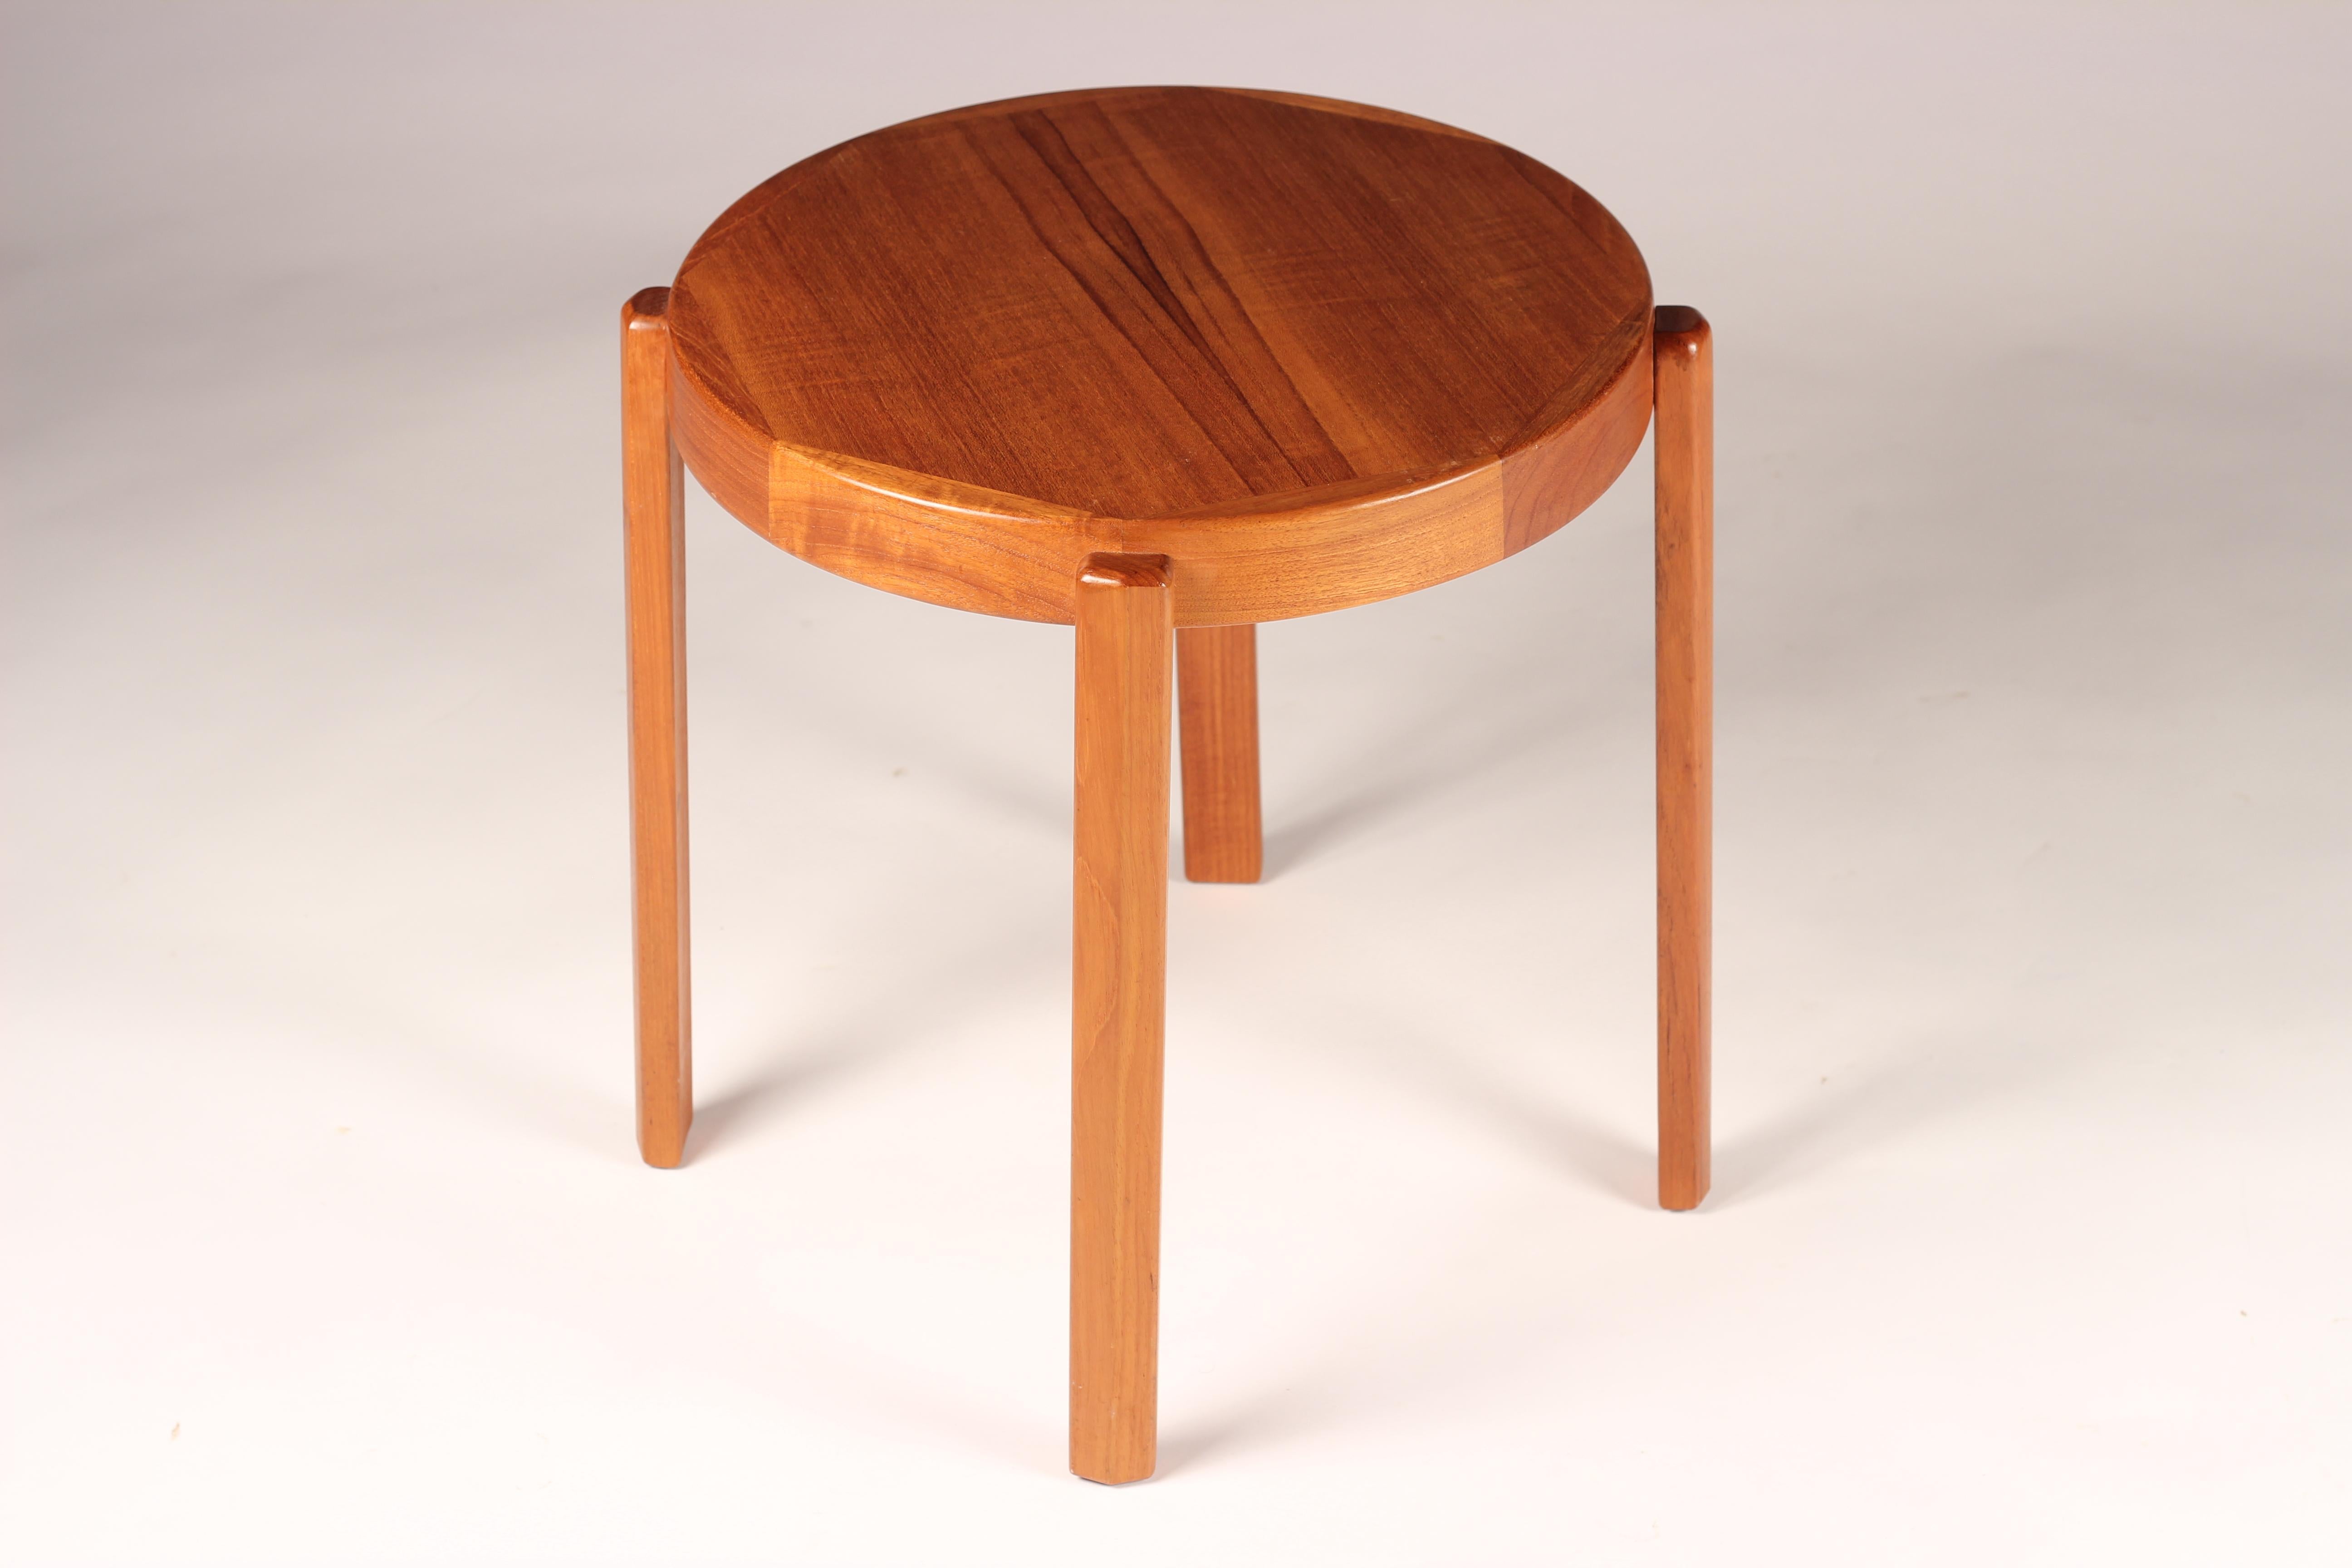 A simple paired back Danish designed Teak Mid-Century Modern Table. Professionally polished and in good condition. With fine and interesting grain pattern and simple detailing, this table dismounts for easy shipping or storage.